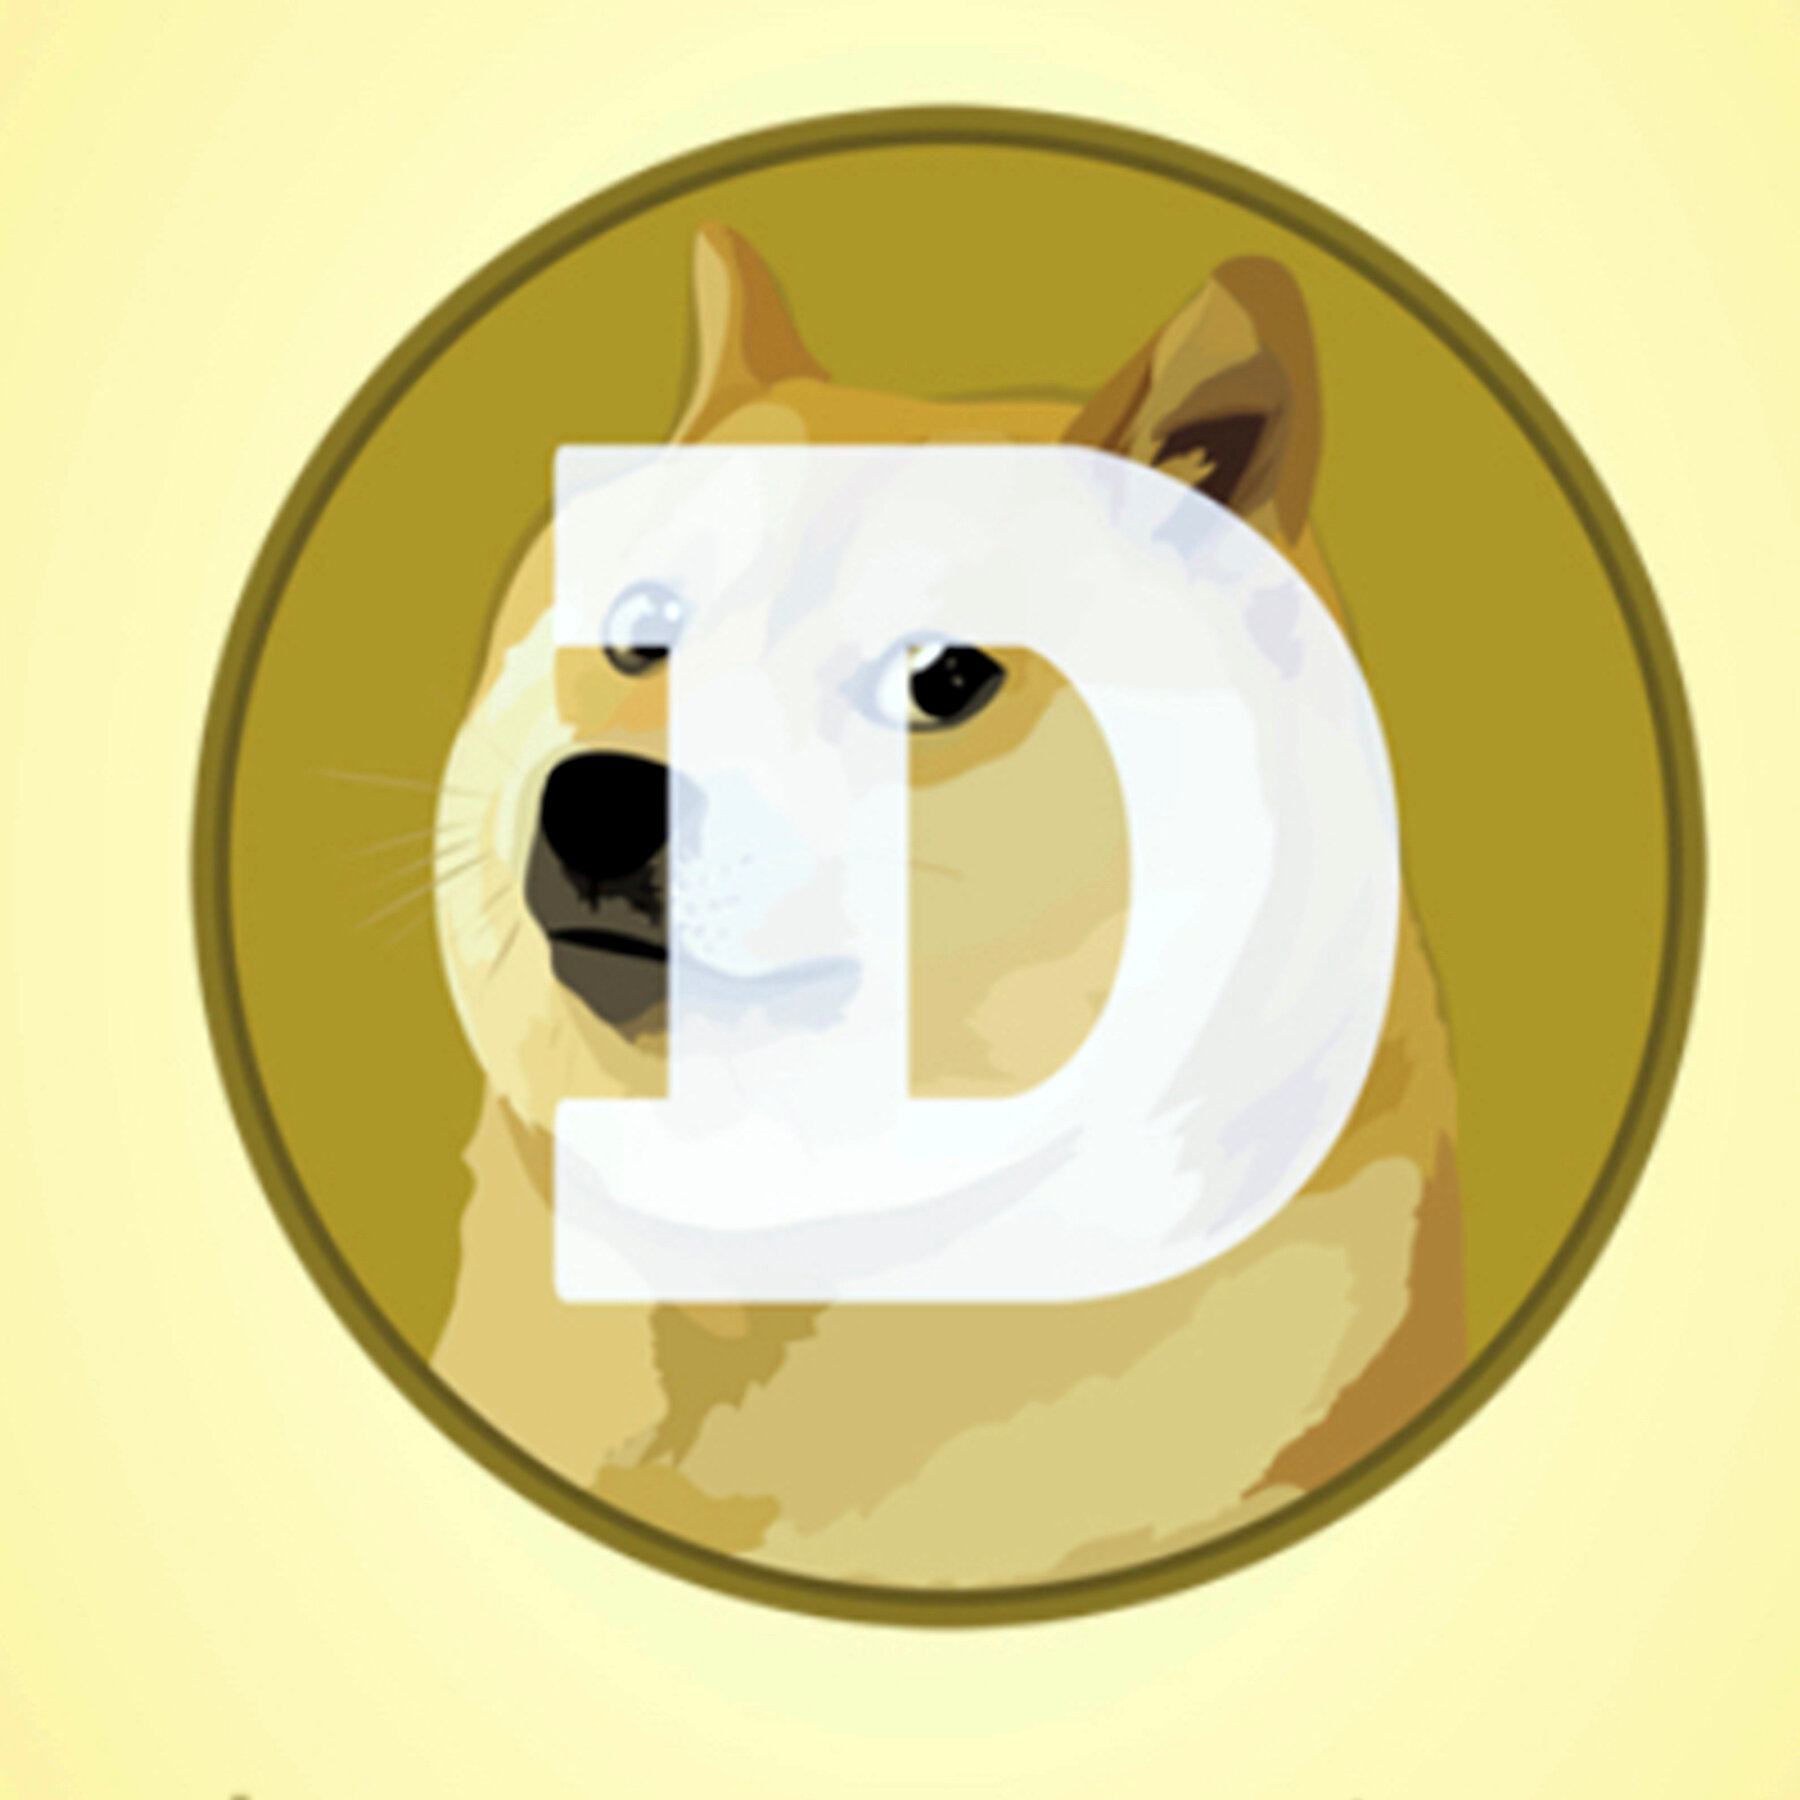 Dogecoin Review - Is Dogecoin Legit or Scam